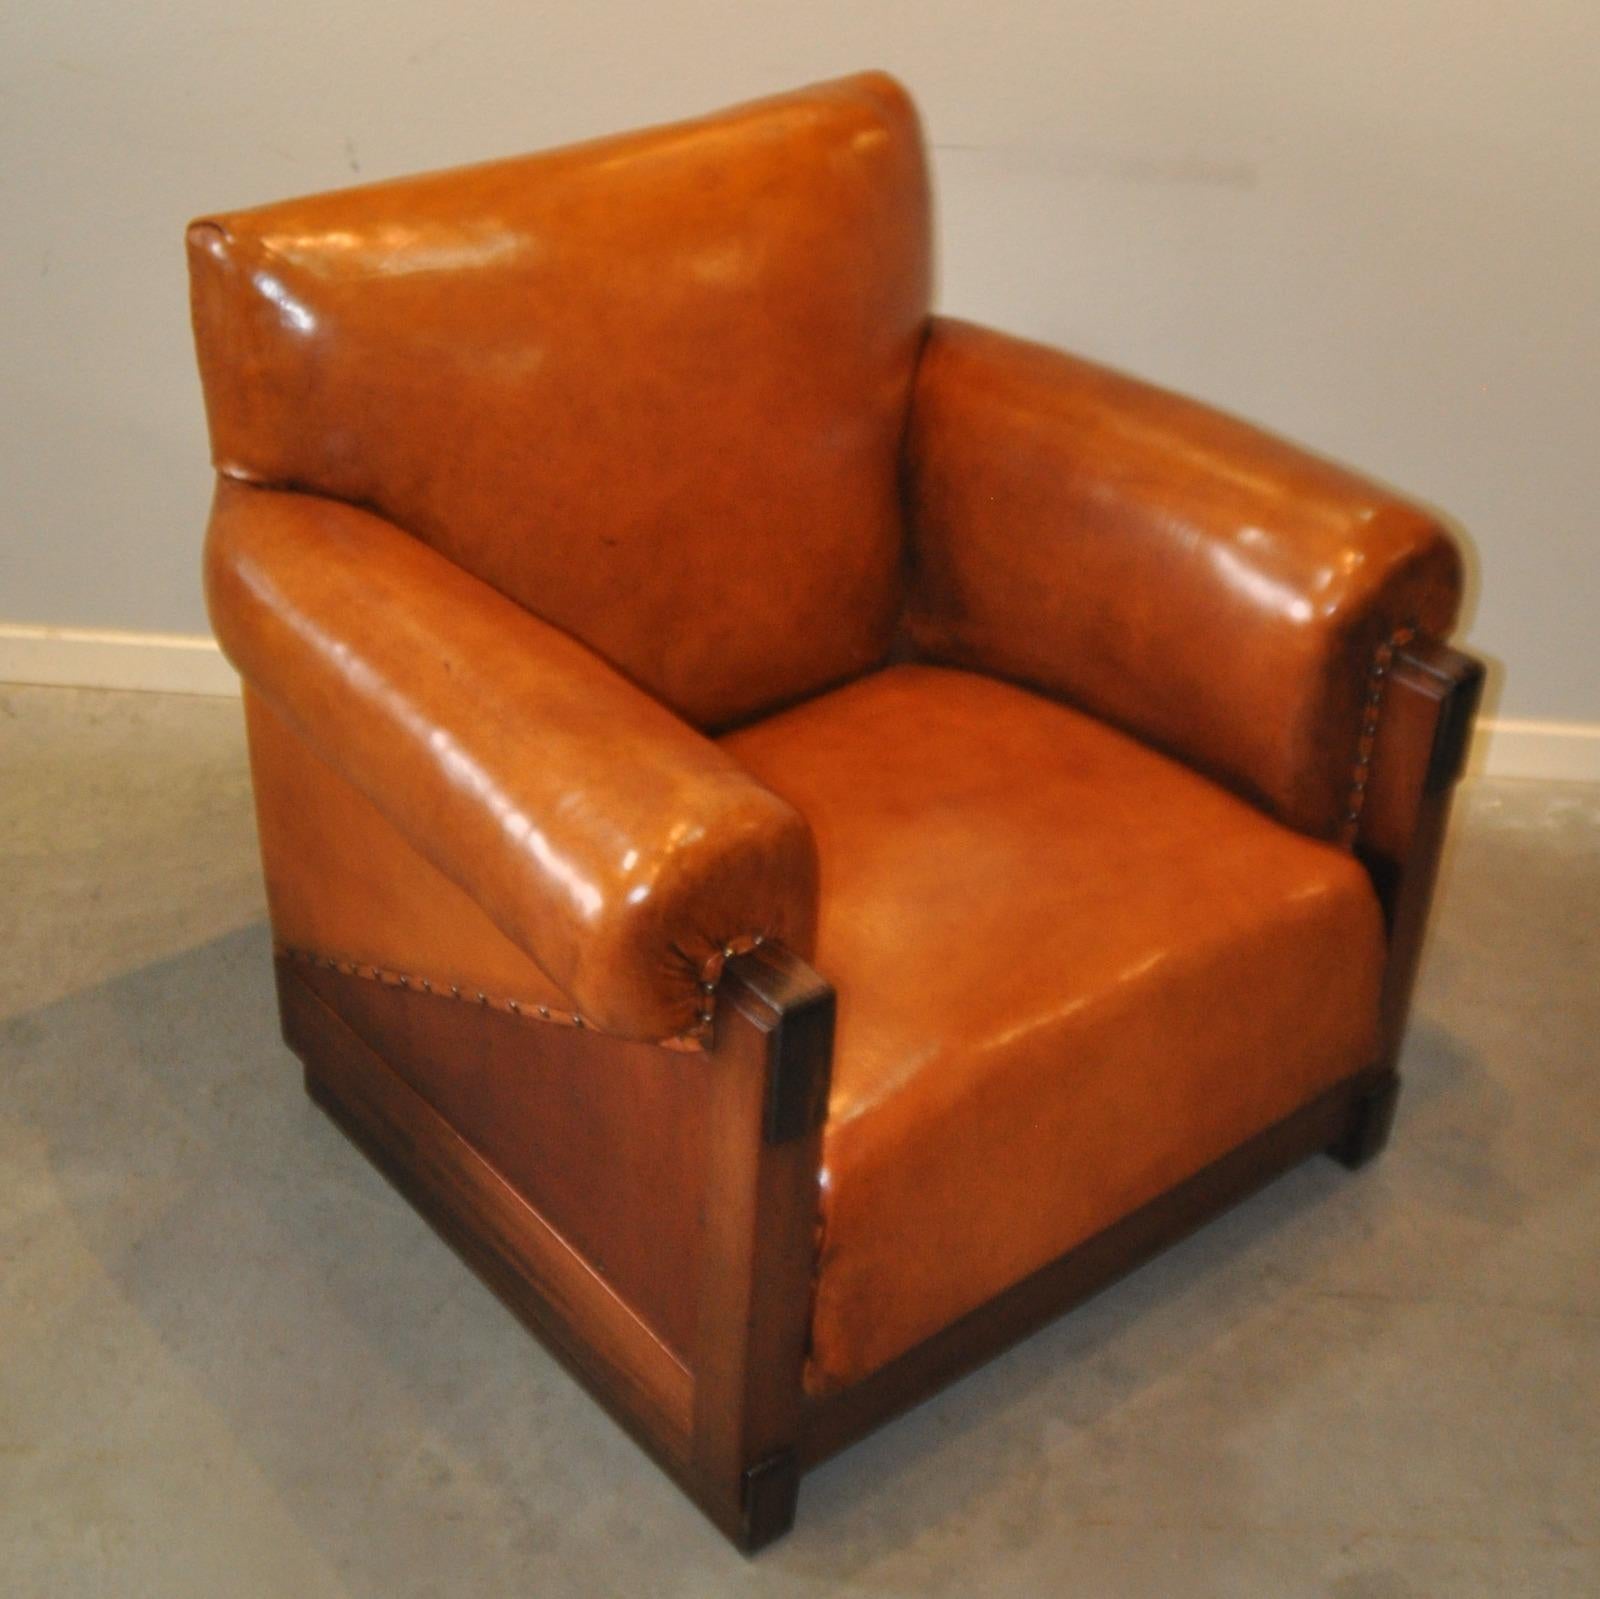 20th Century Art Deco, Amsterdam School Armchairs in Sheep Leather, 1920-1930s